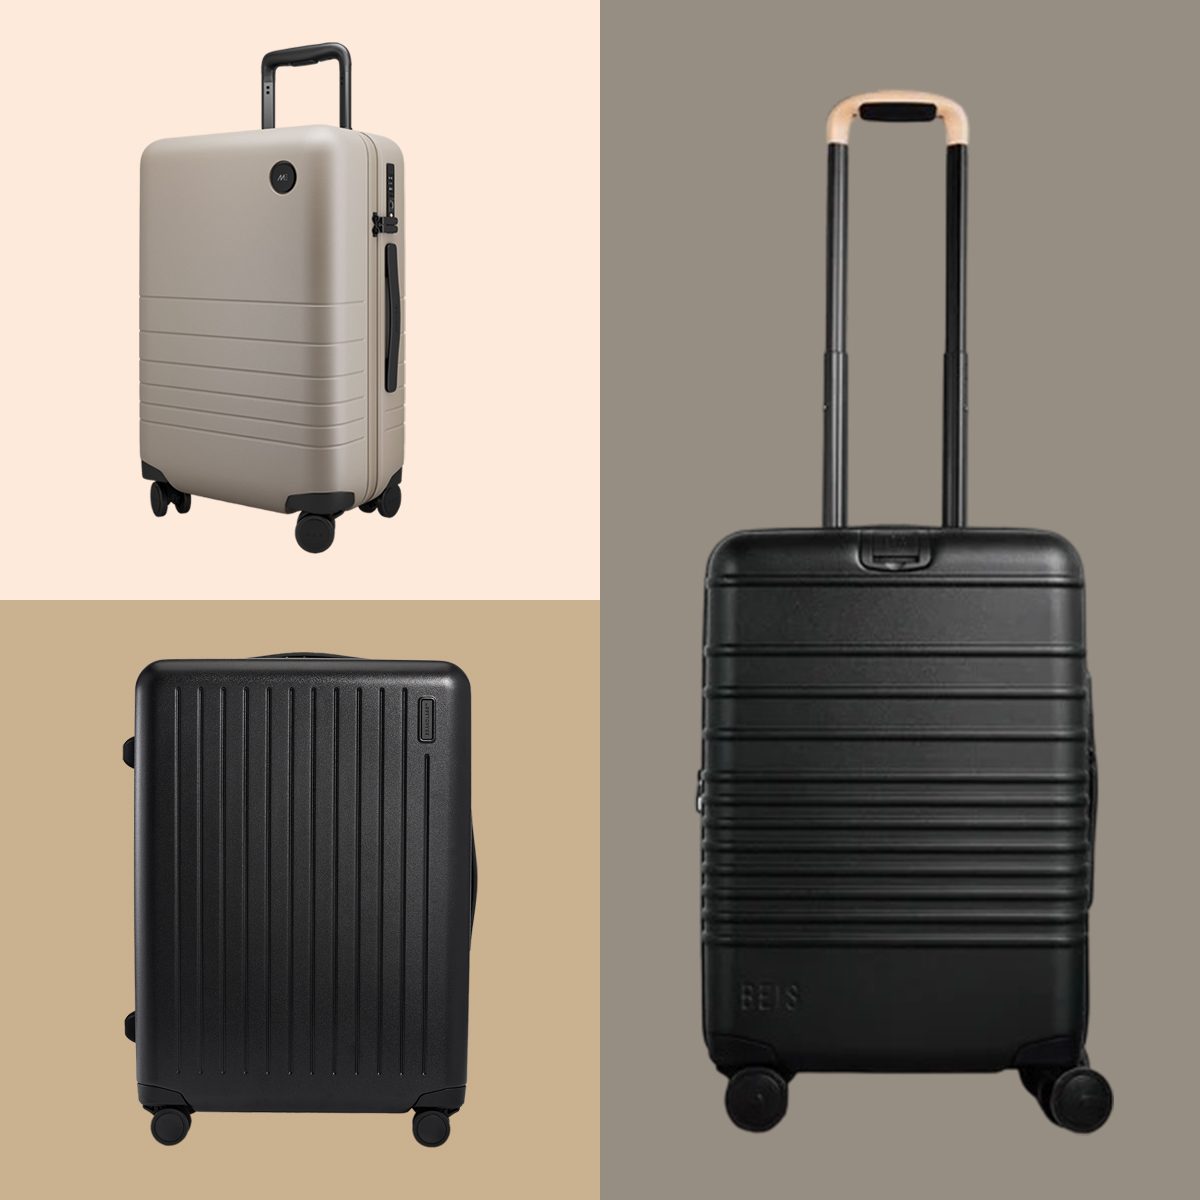 https://www.rd.com/wp-content/uploads/2022/09/The-8-Best-Luggage-Sets-of-2023-According-to-Travel-Experts1_FT_via-amazon.com_.jpg